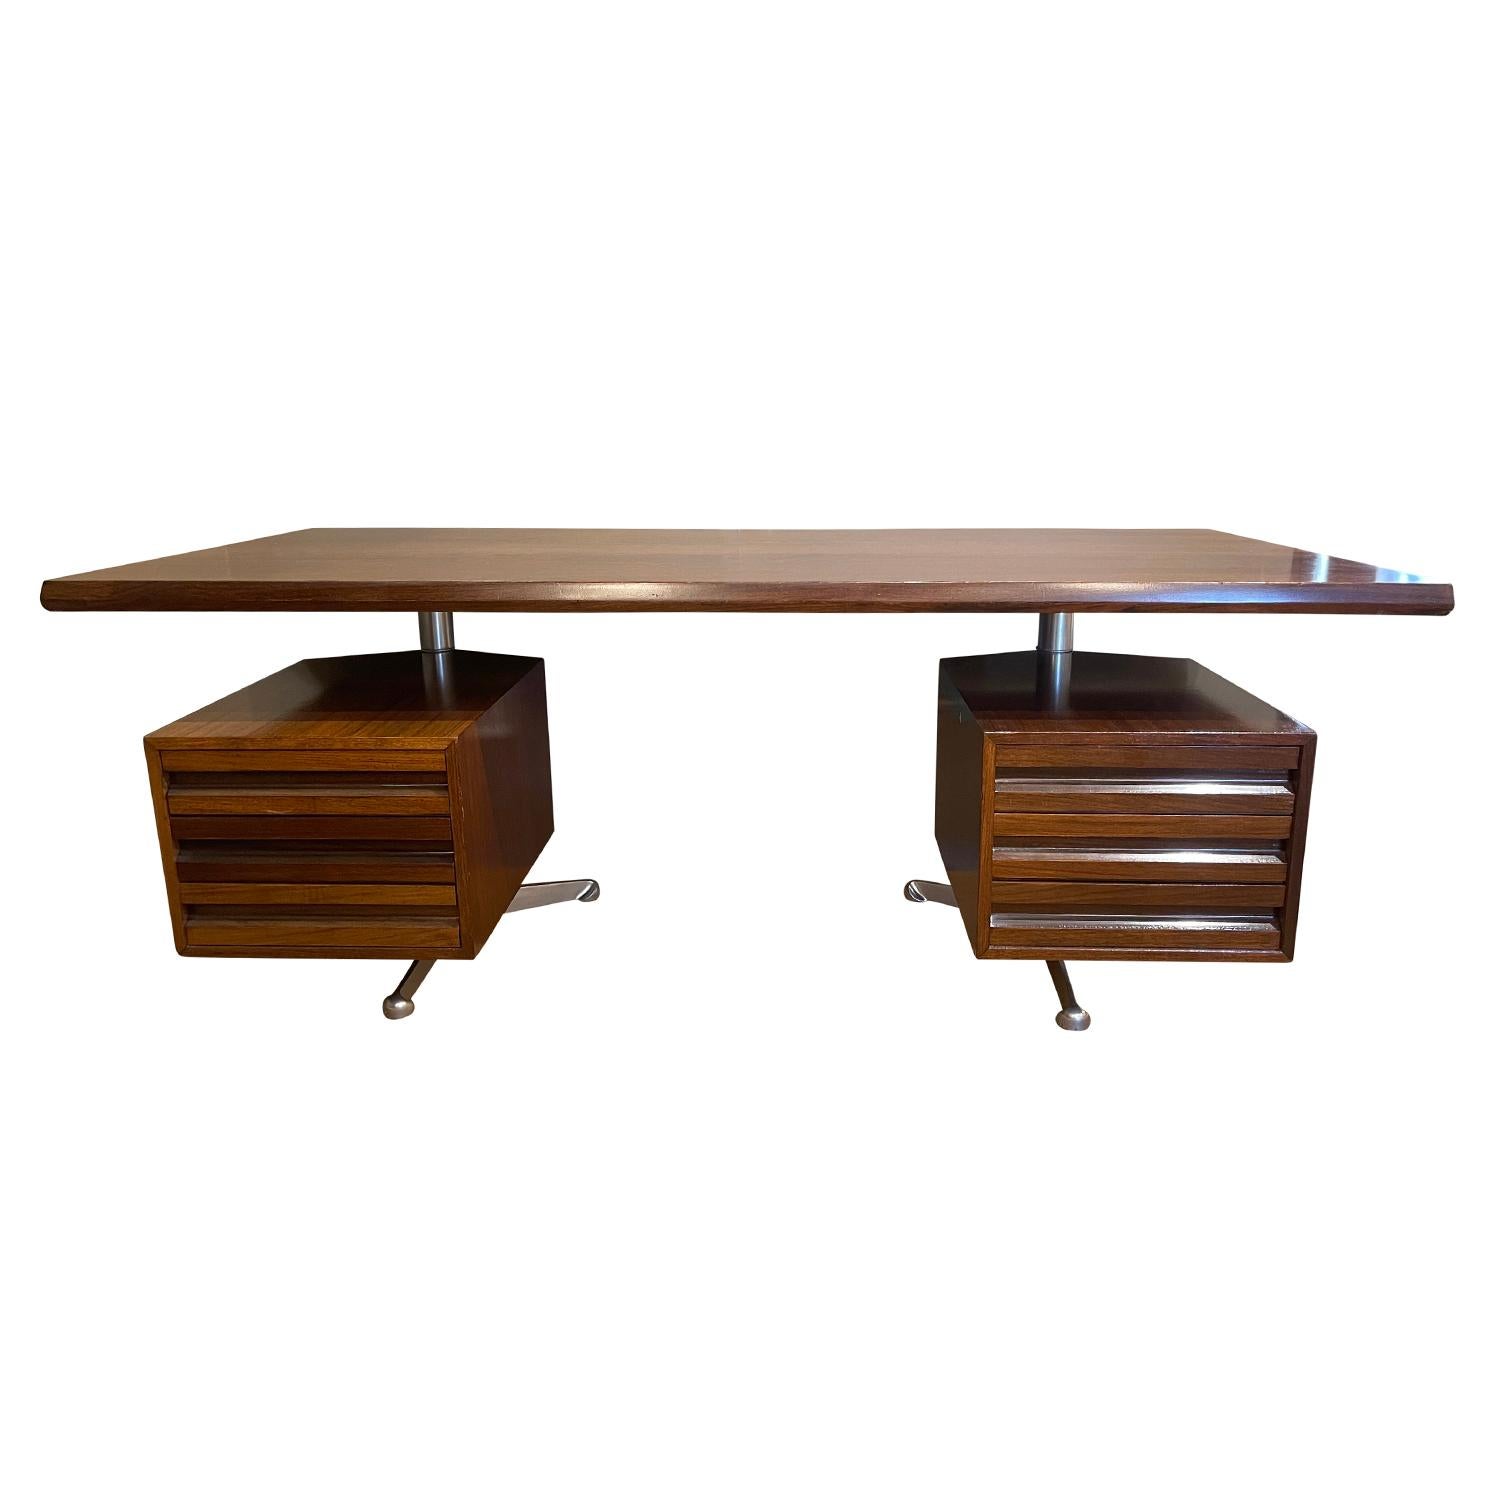 A vintage Mid-Century Modern Italian writing table made of hand carved rosewood, designed by Osvaldo Borsani and produced by Tecno, in good condition. The desk is composed with a large table top, six drawers, three on each side, standing on a steel